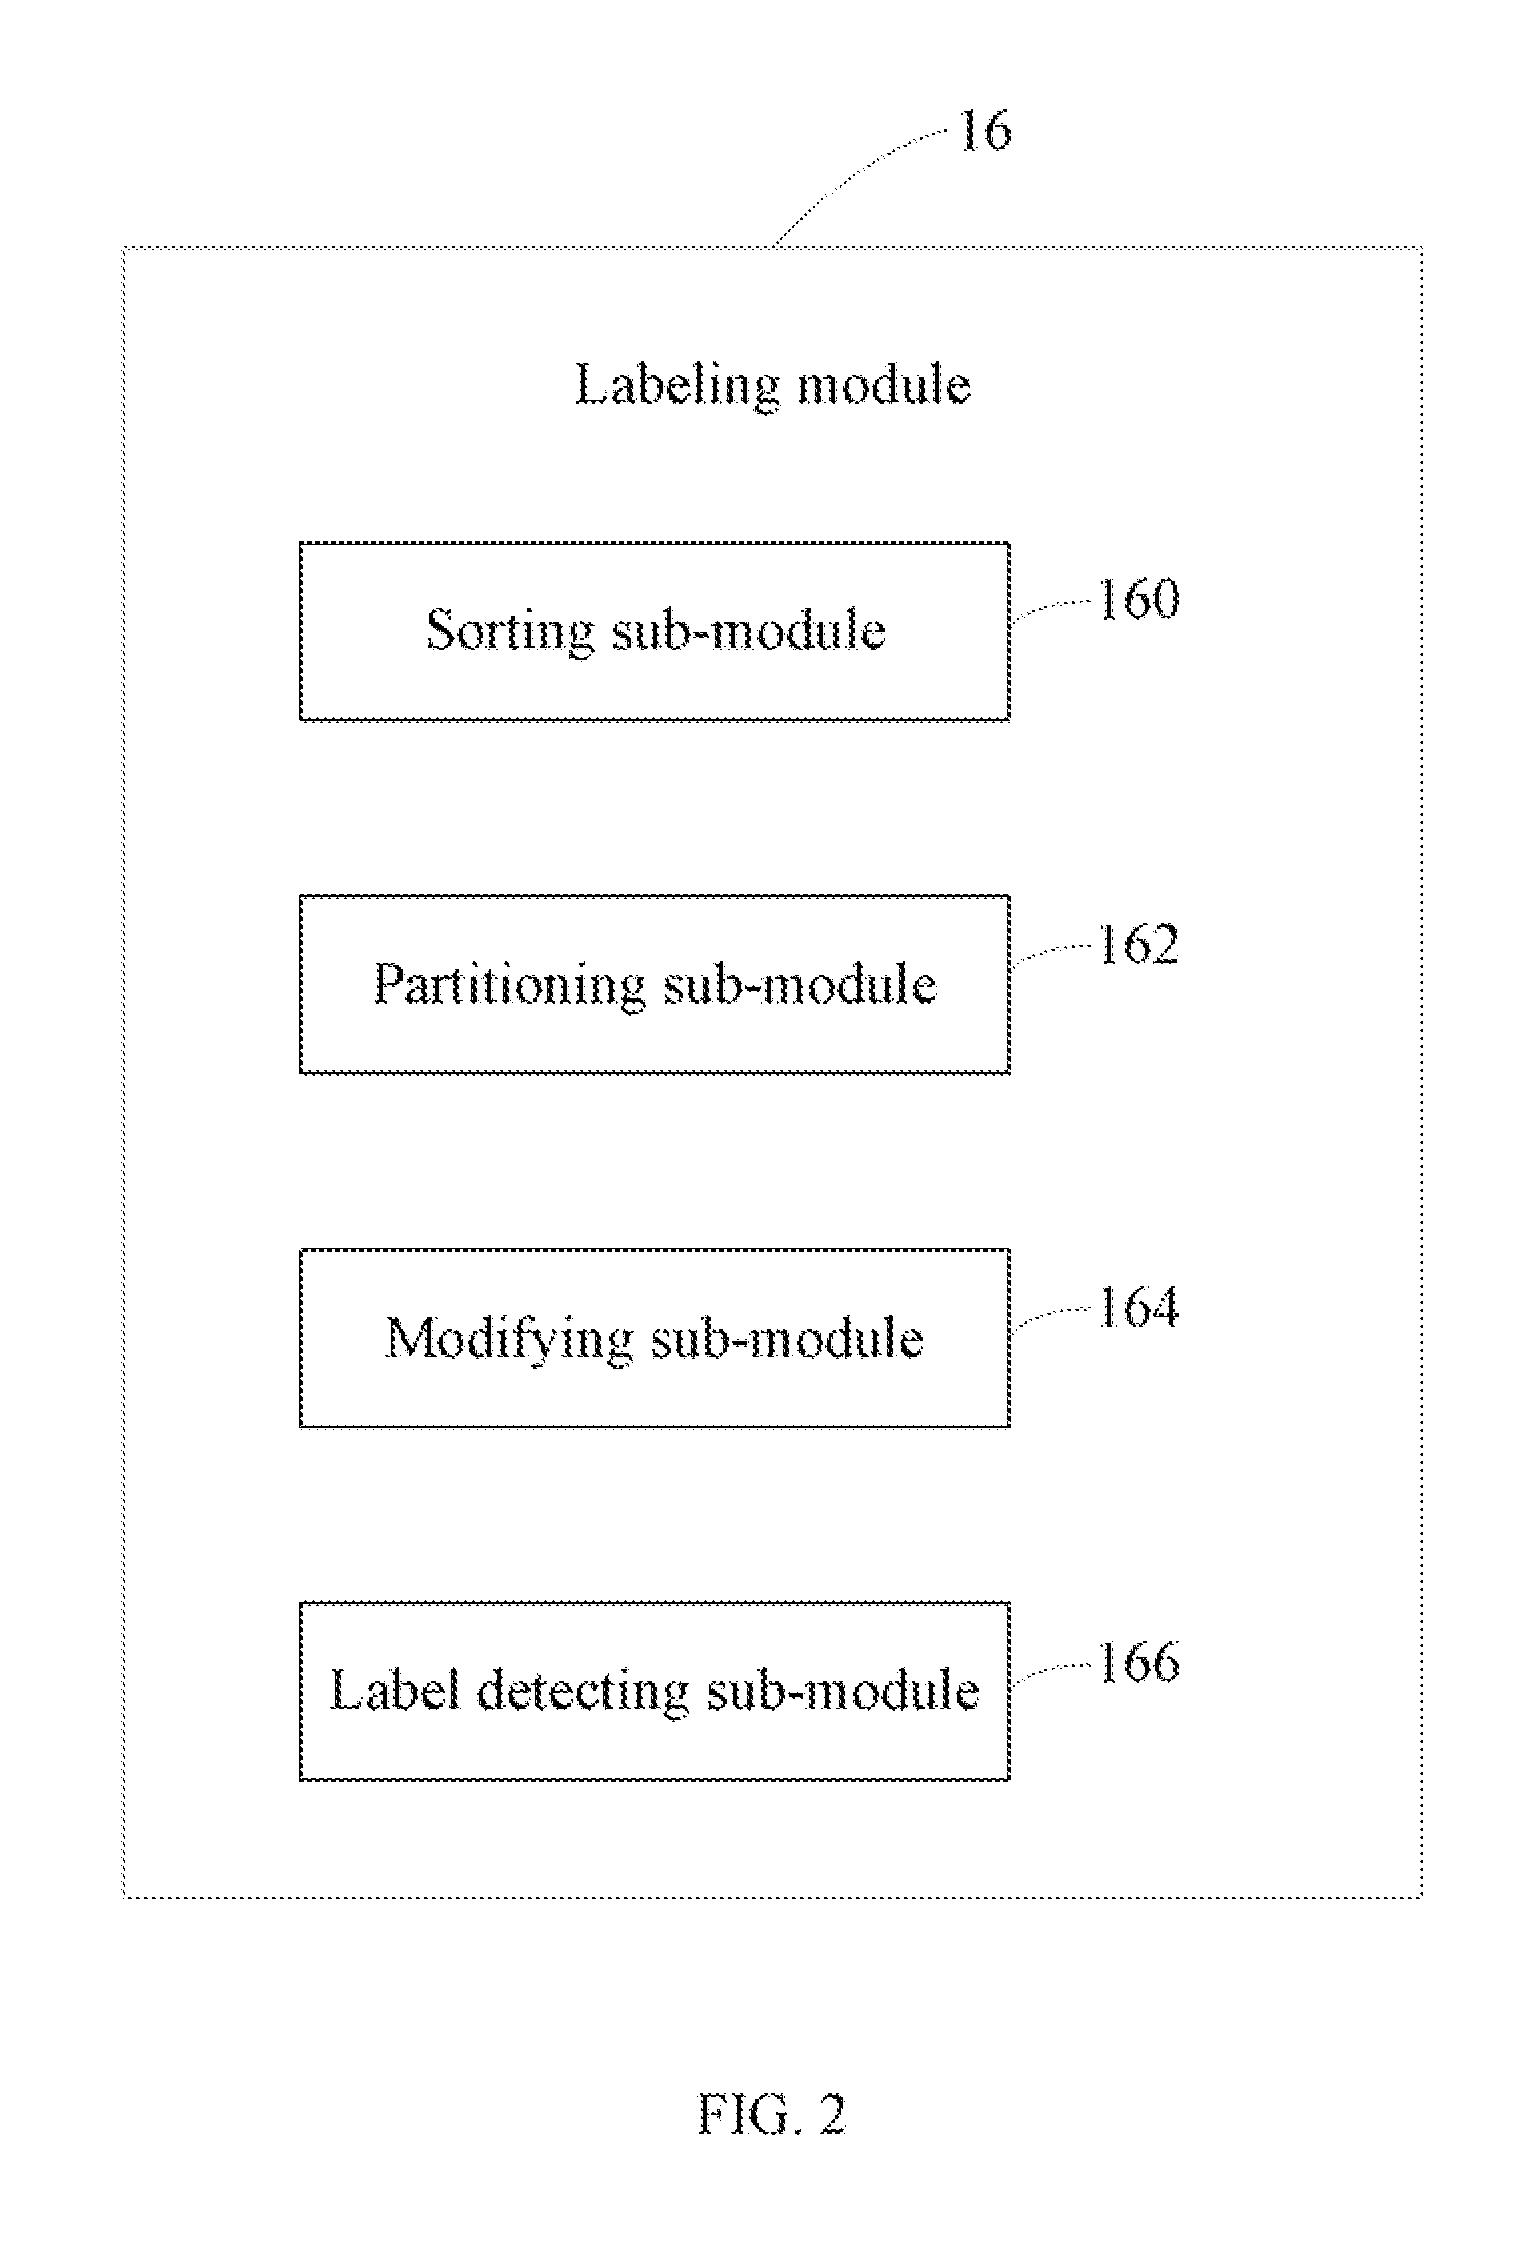 System and method for inserting numeric labels automatically